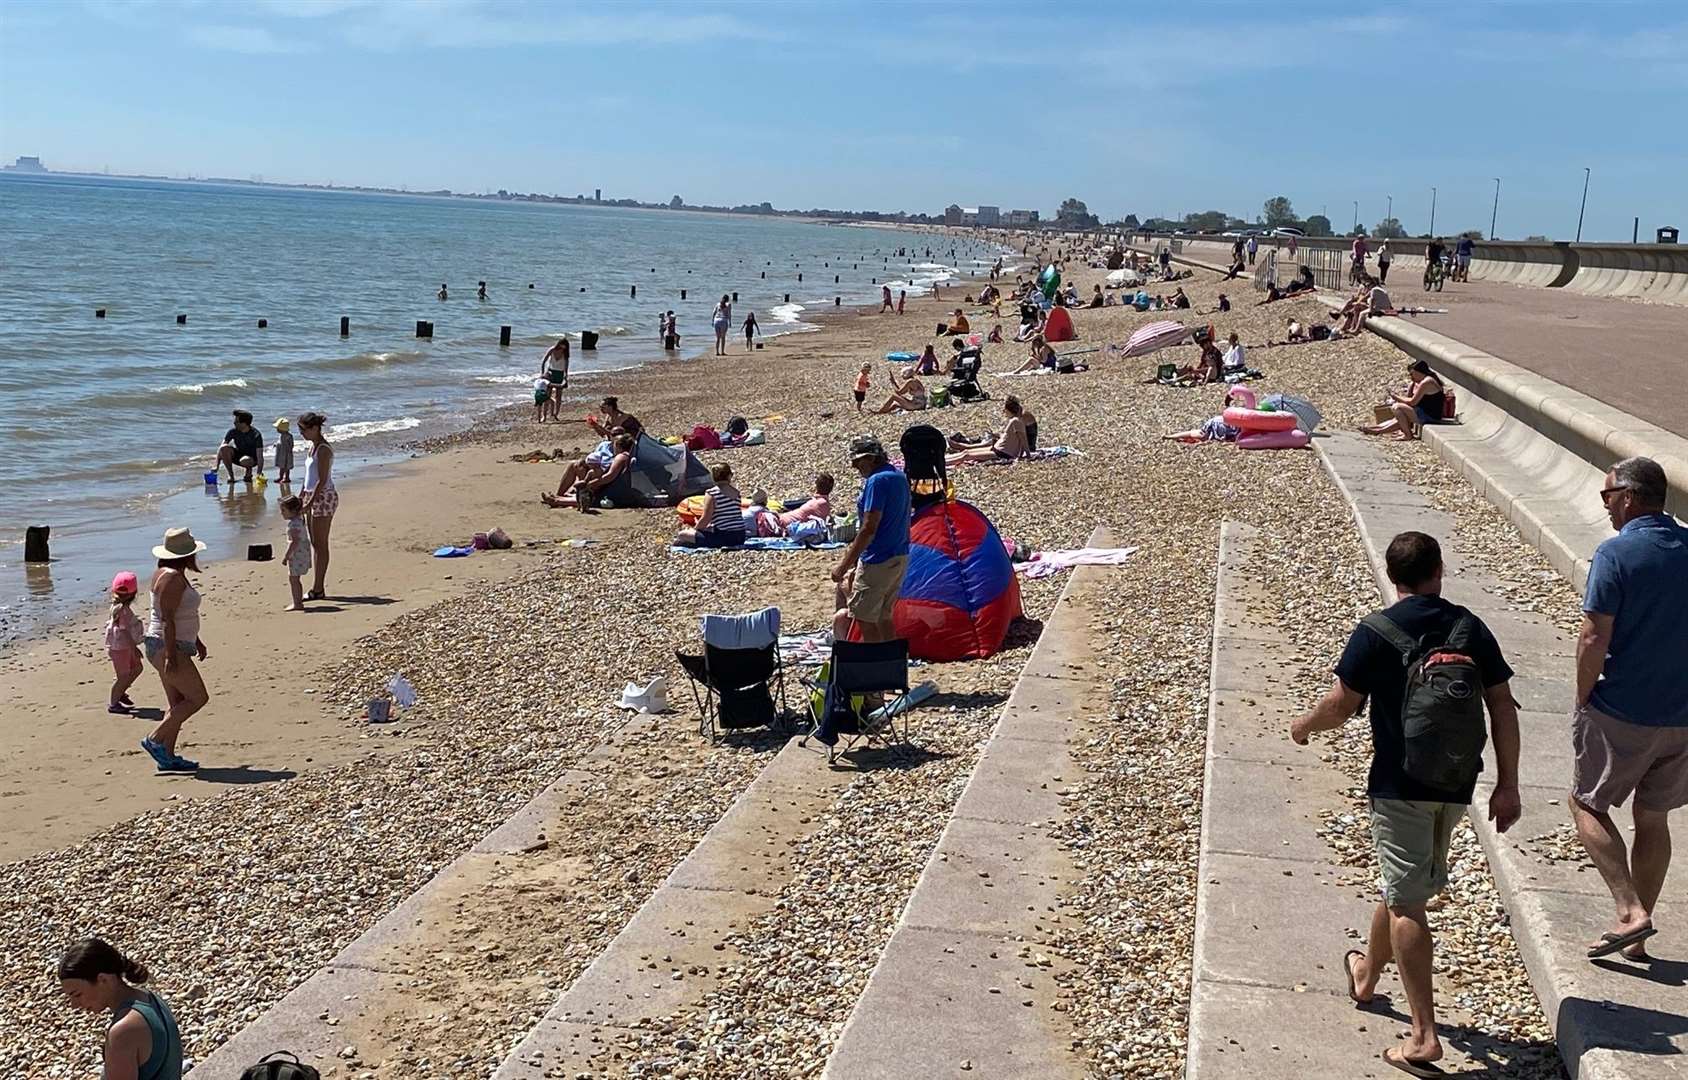 Dymchurch beach is hugely popular with families and holidaymakers in the summer months